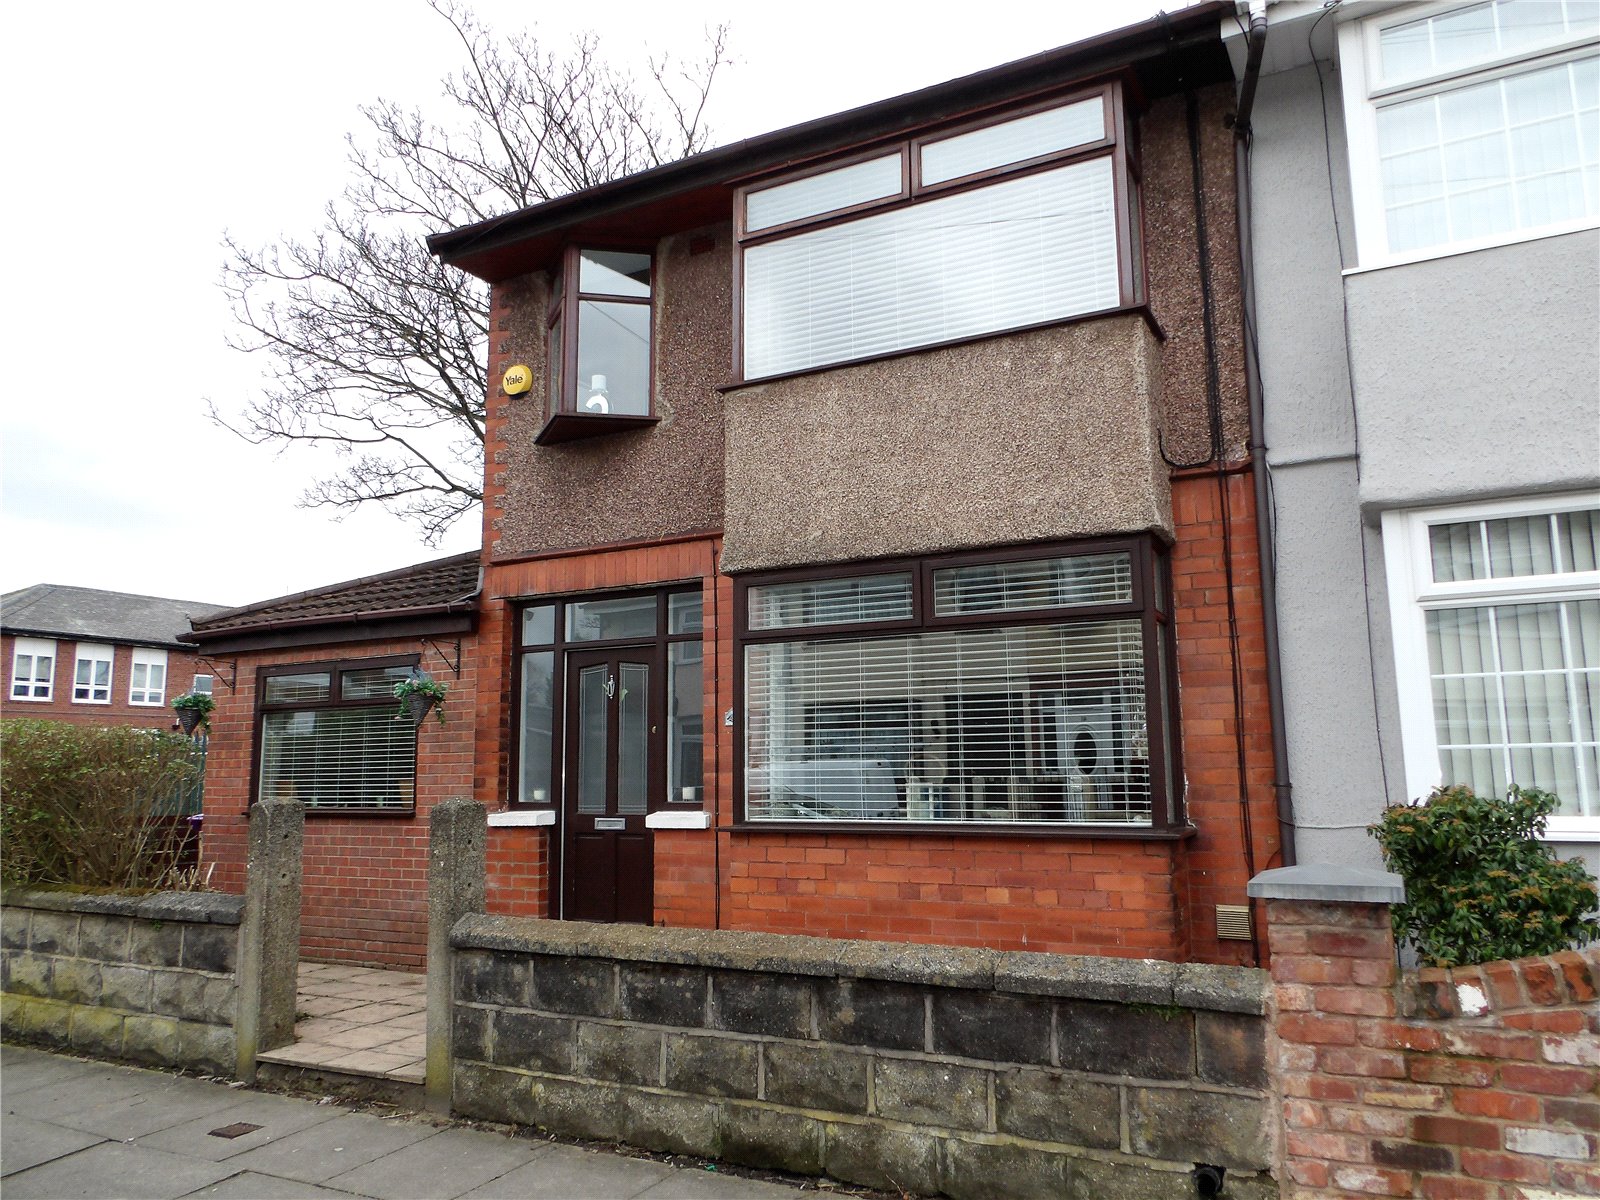 Heliers Road, Liverpool, L13 4DH